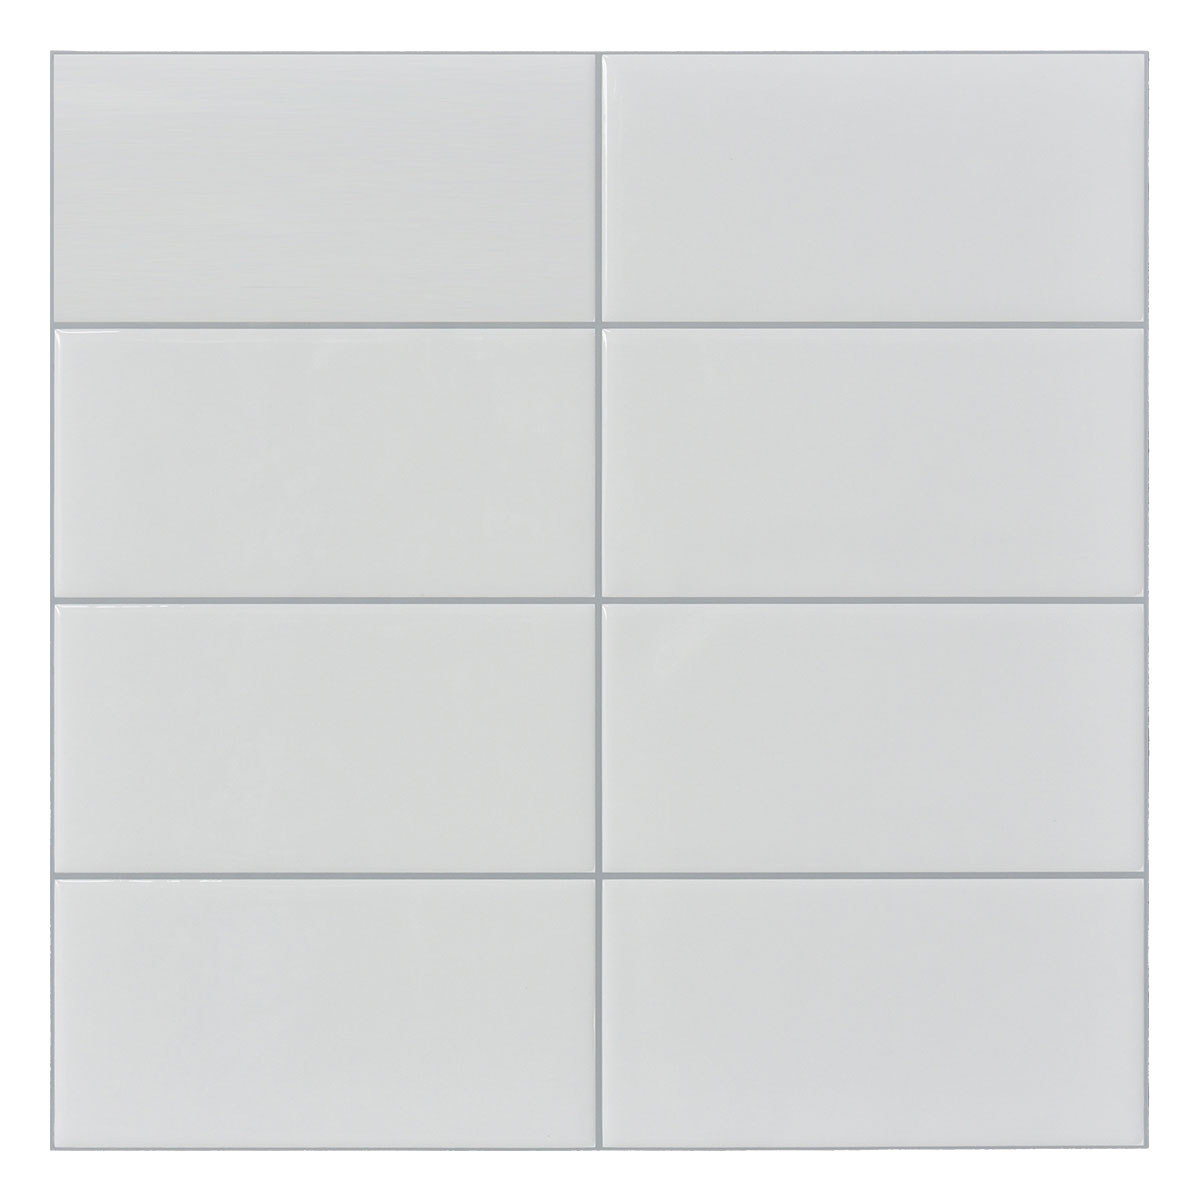 10 Sheets Peel and Stick Tile Backsplash for Kitchen in White Subway Self-Adhesive Stickers